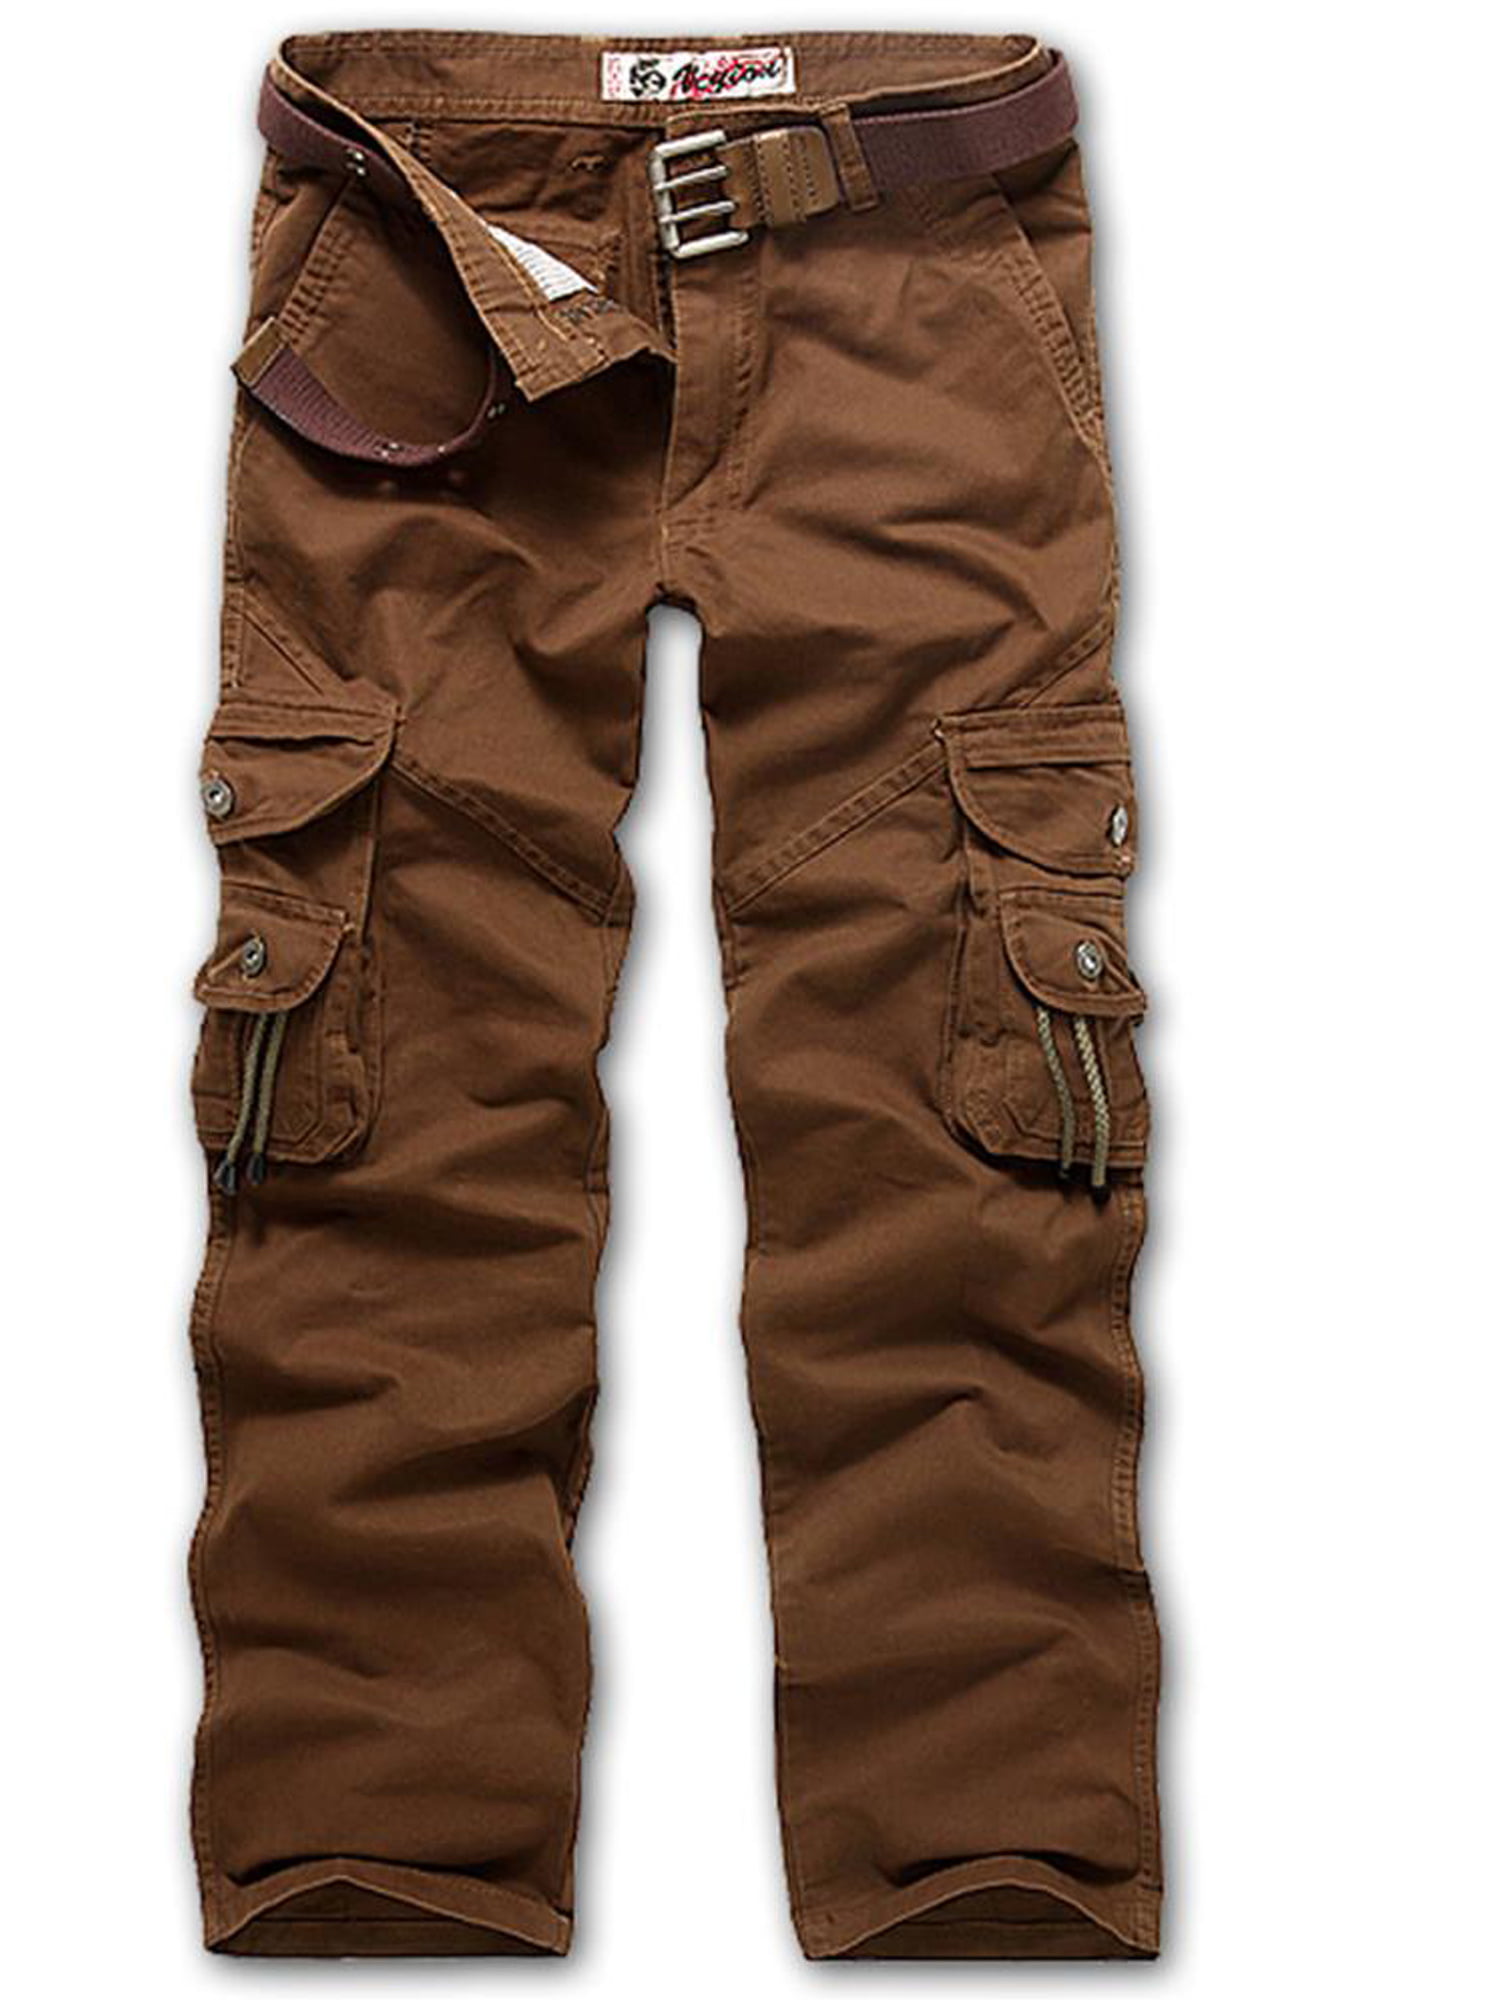 Tactical Trousers Soldier Fishing Men Cargo Hiking Casual Pants Combat Outdoor * 